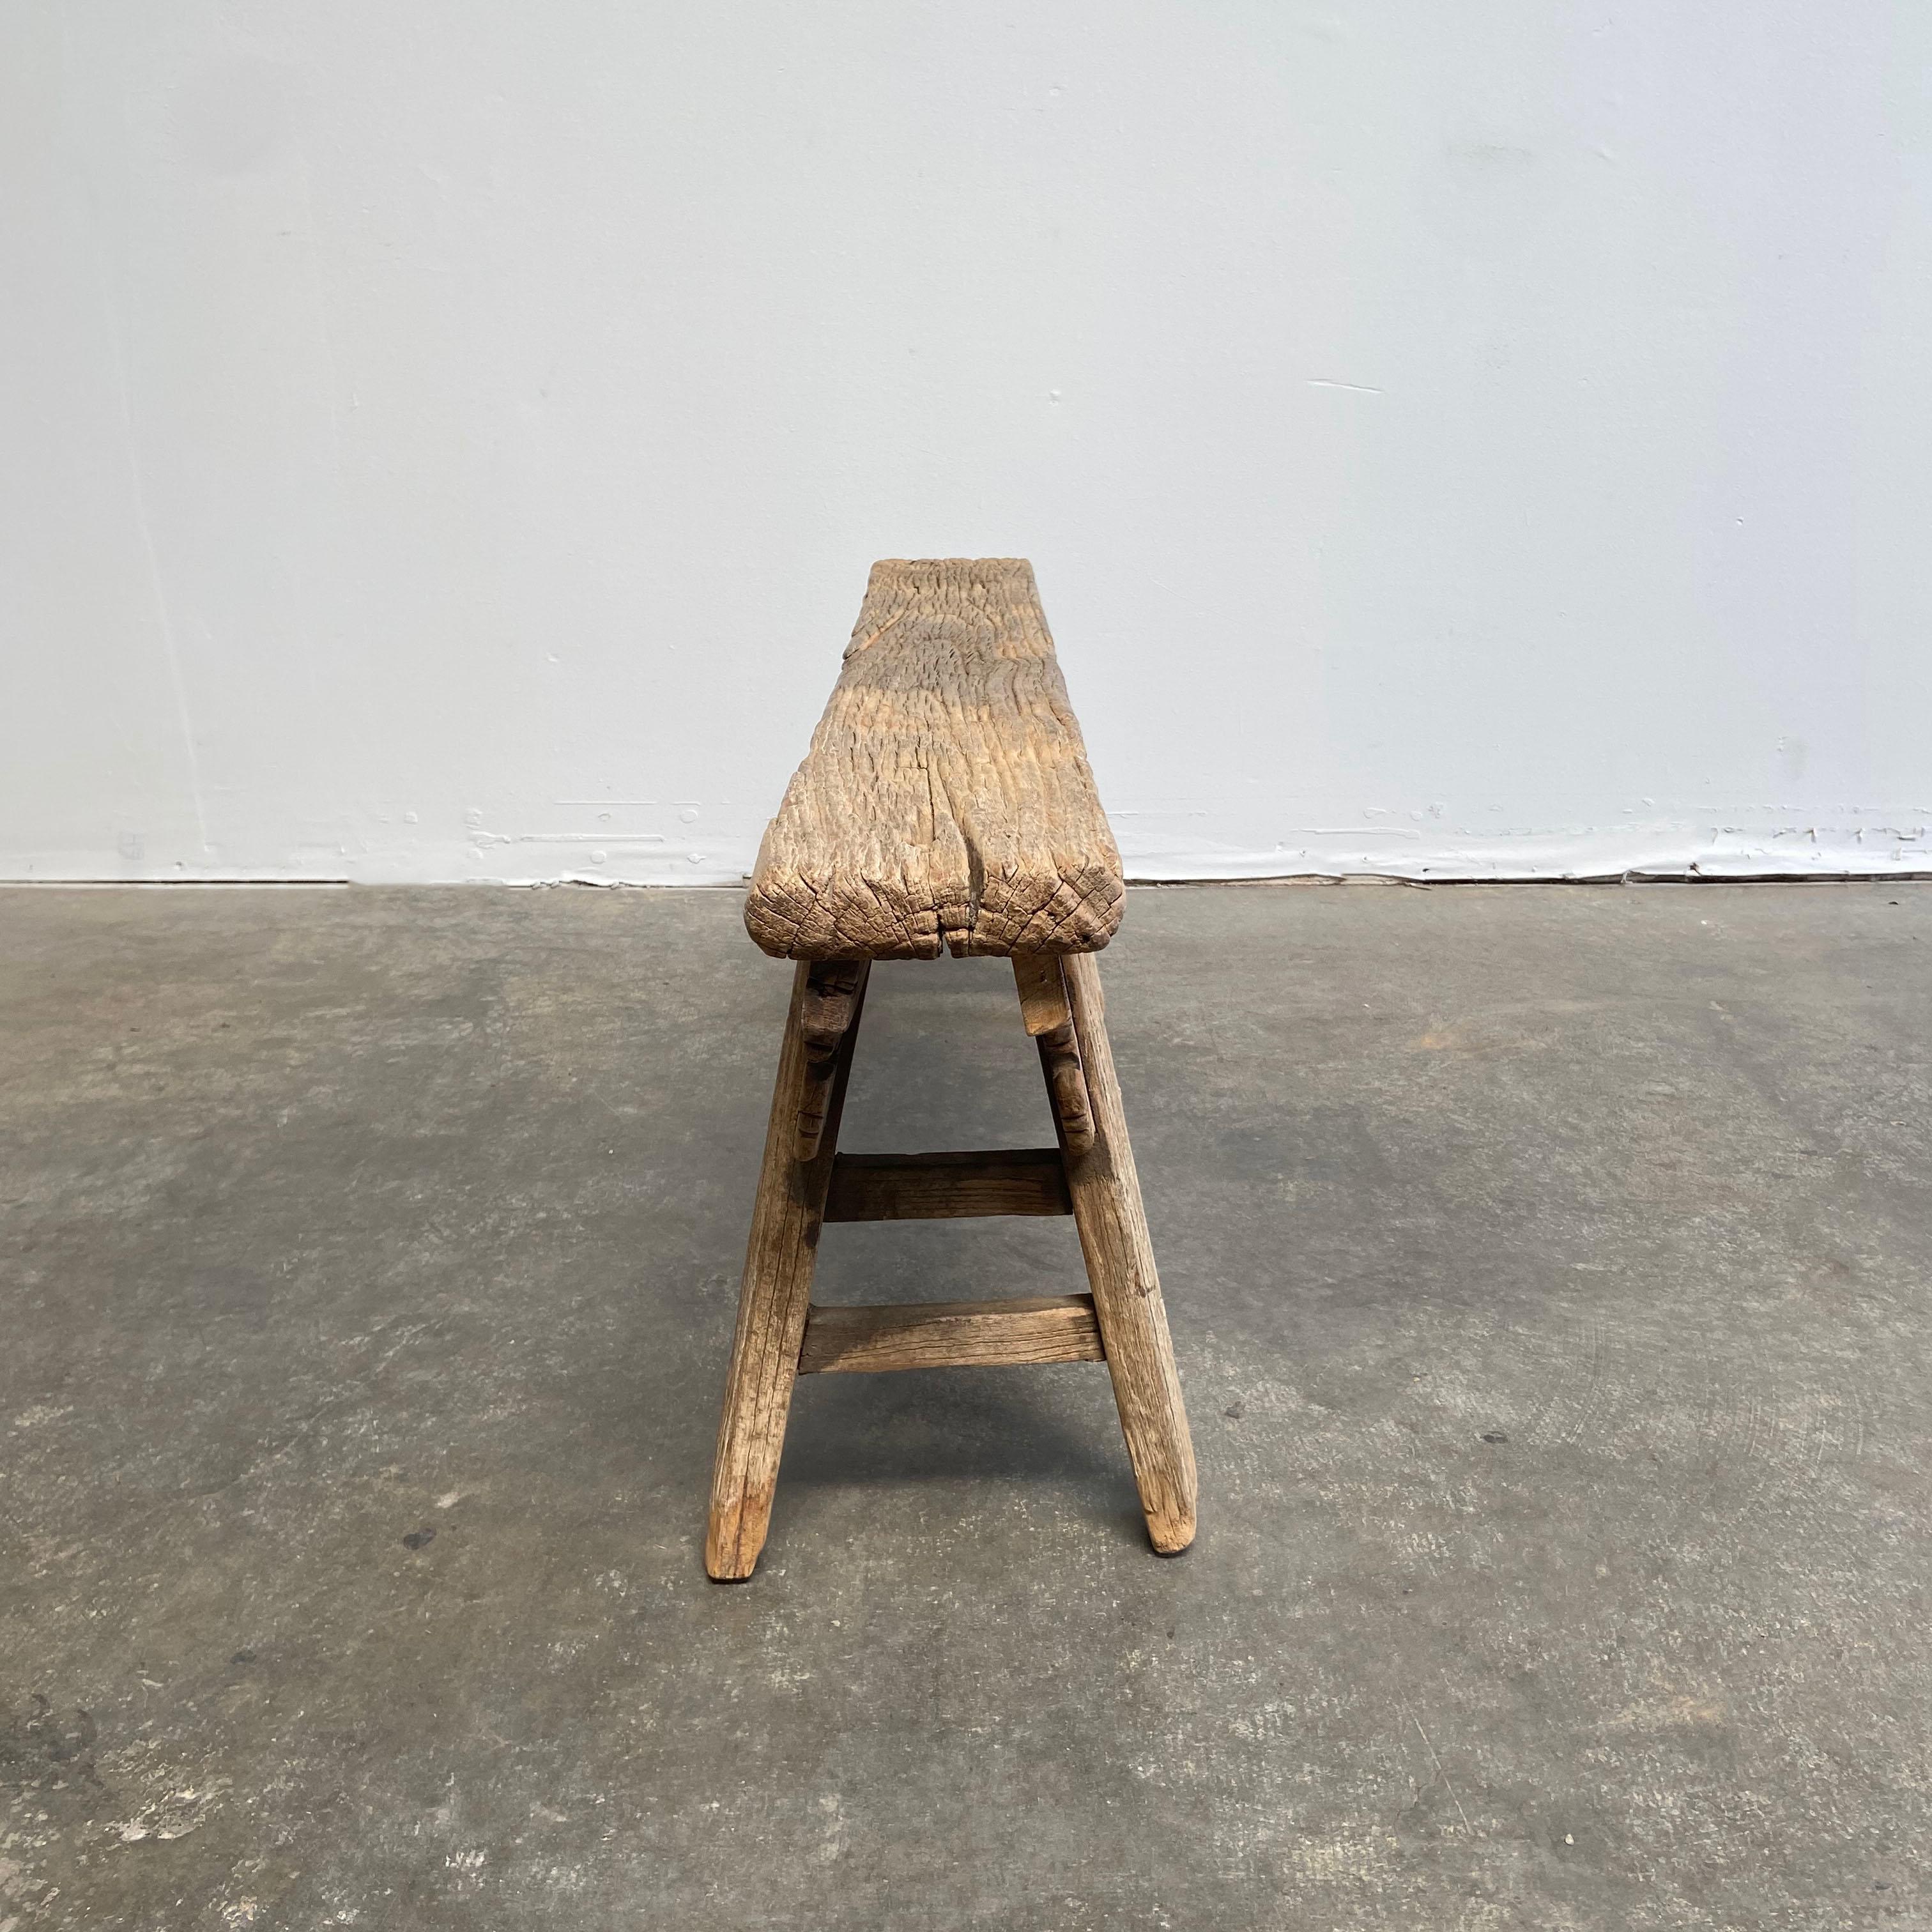 Vintage antique elm wood skinny bench
These are the real vintage antique elm wood benches! Beautiful antique patina, with weathering and age, these are solid and sturdy ready for daily use, use as a table behind a sofa, stool, coffee table, they